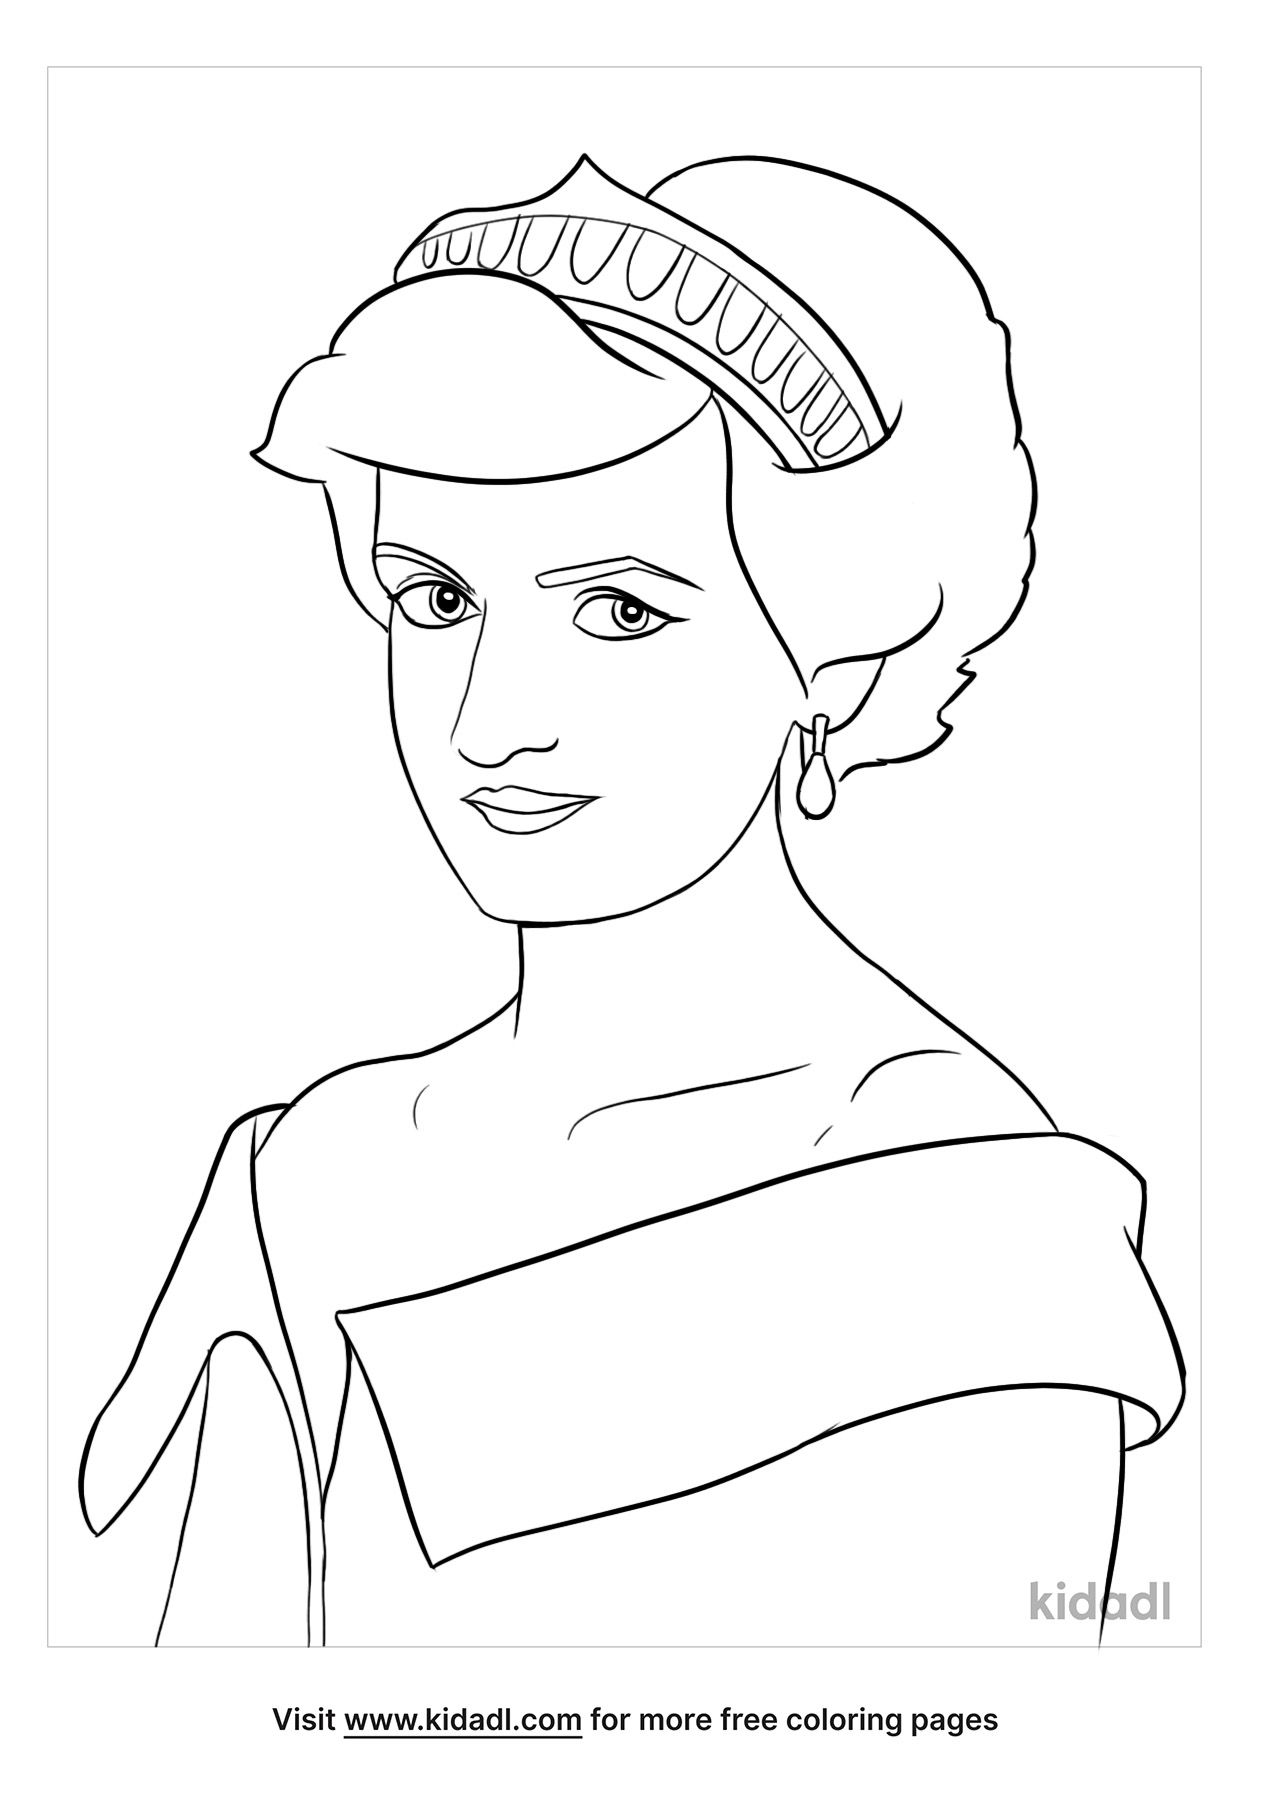 diana-coloring-pages-printable